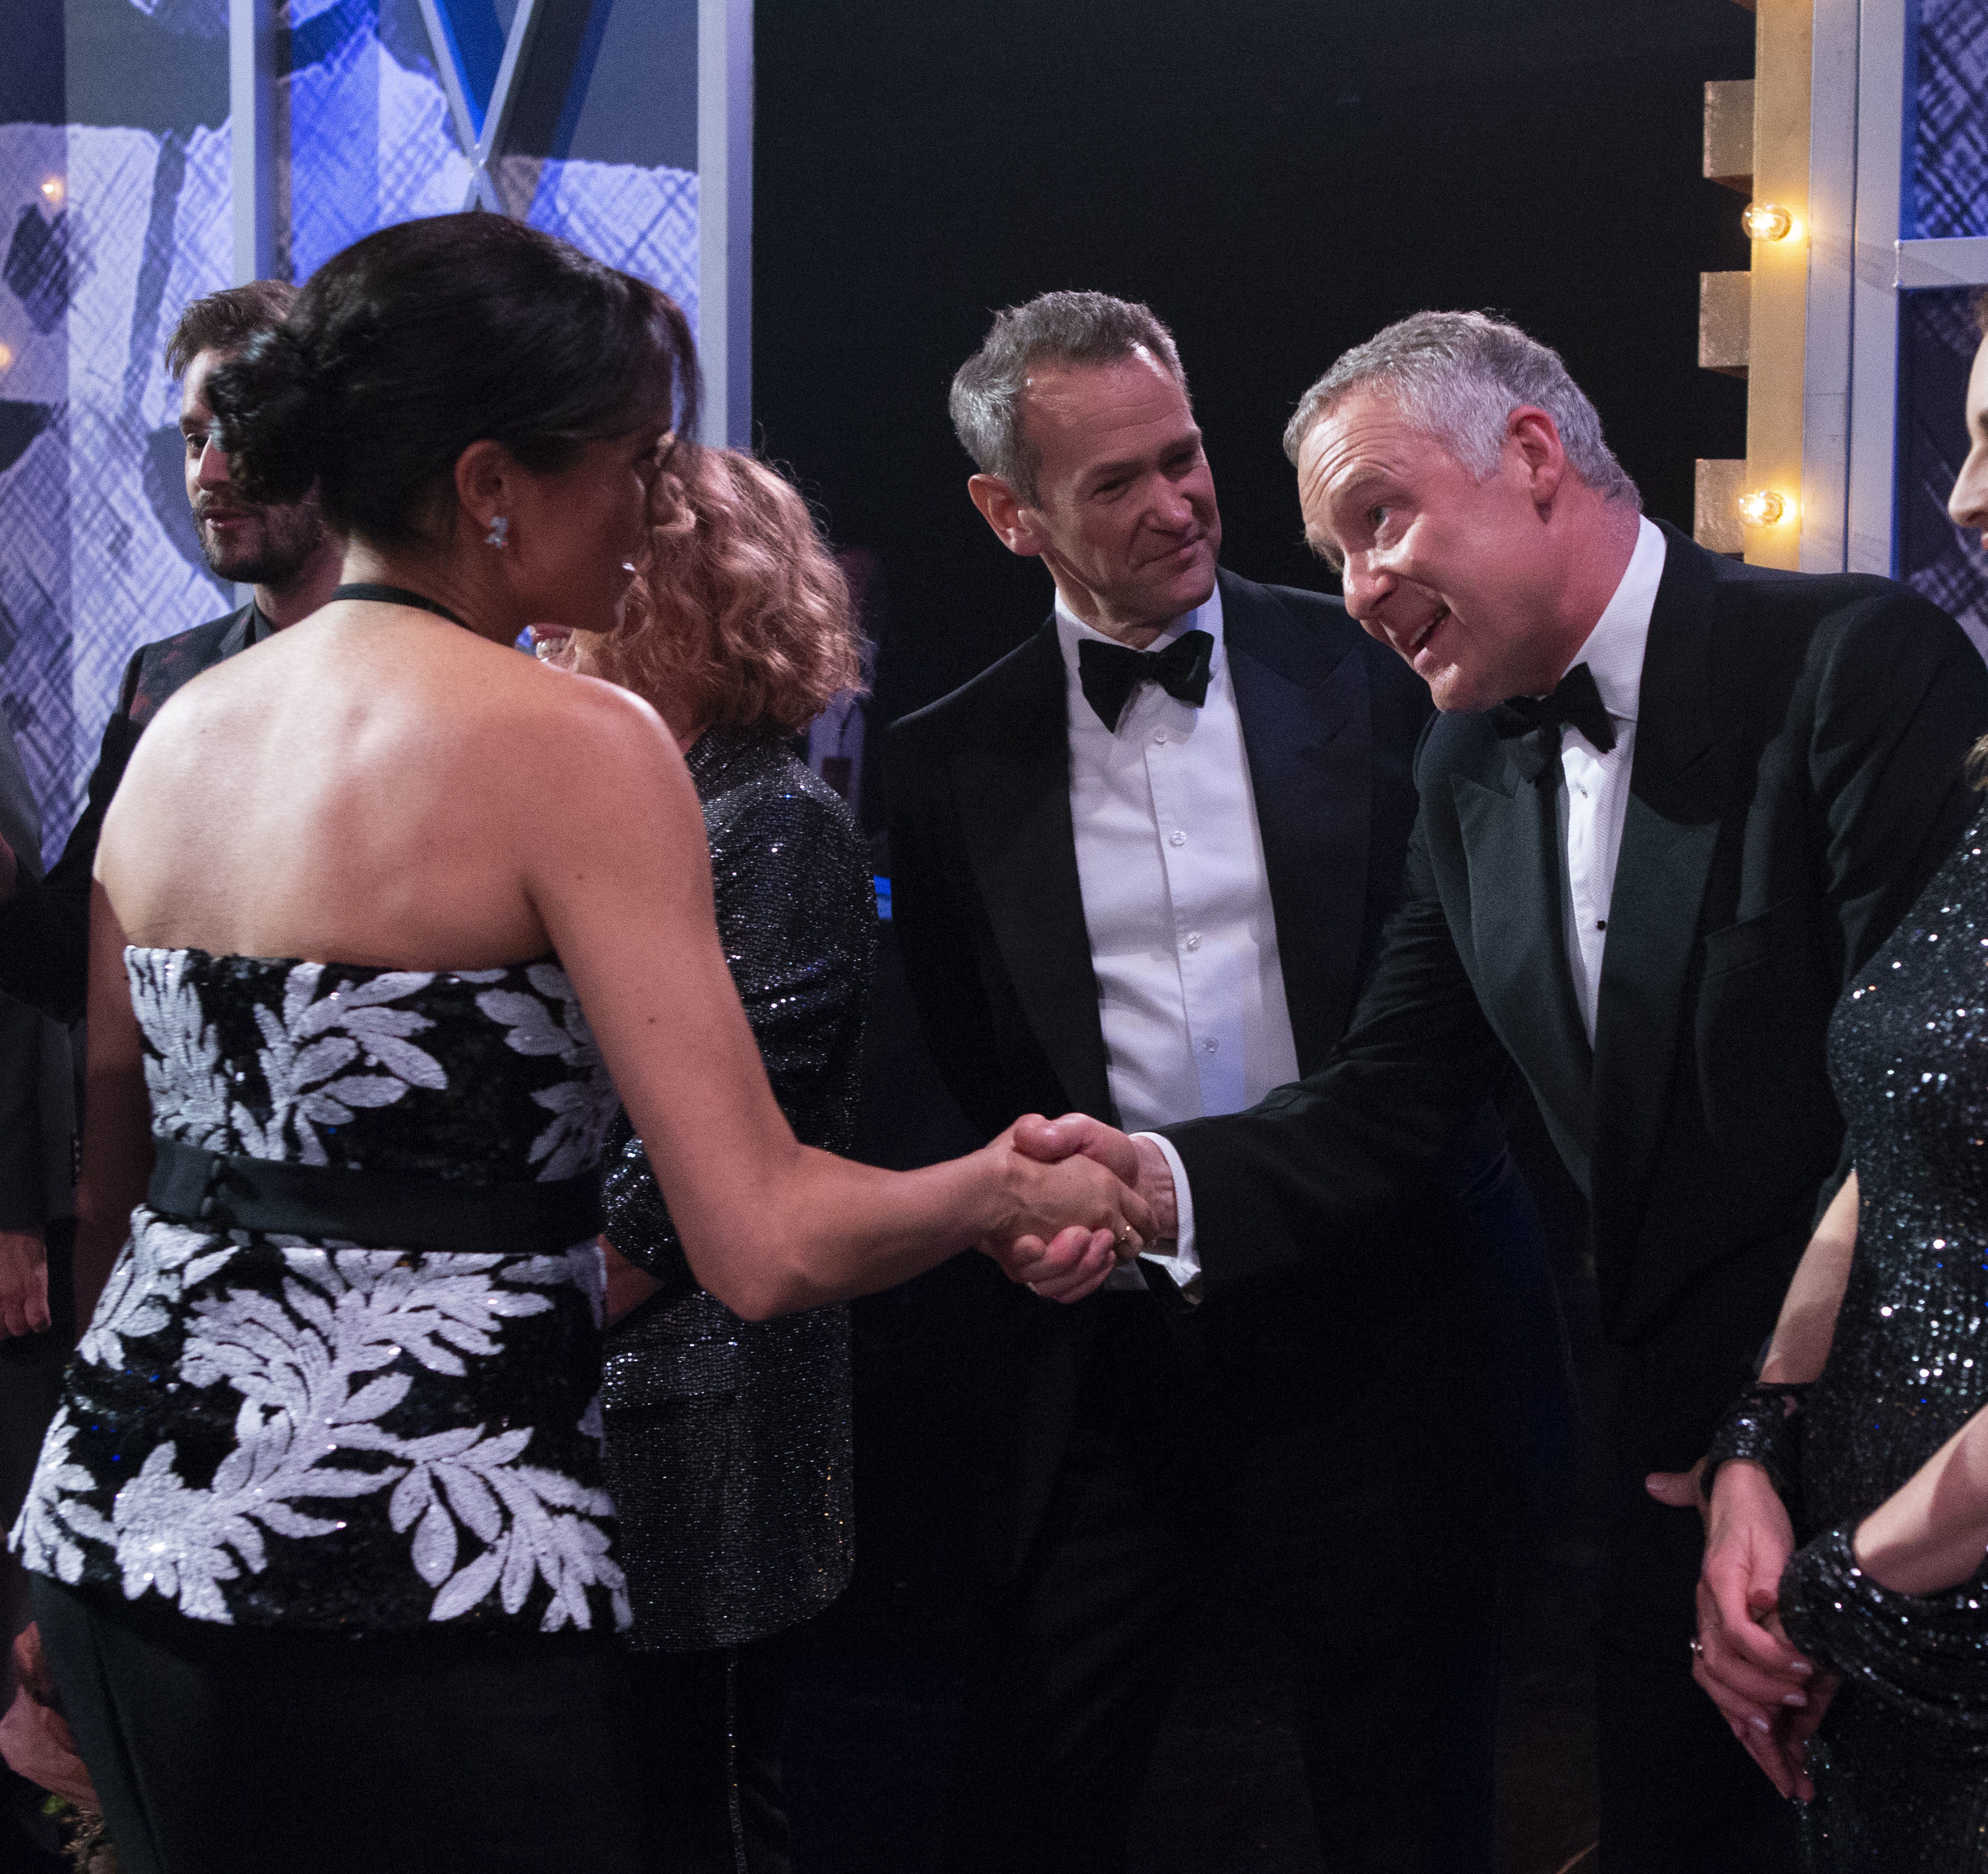 The Duchess of Sussex meets Rory Bremner on stage at the Royal Variety Performance at the London Palladium in central London. 